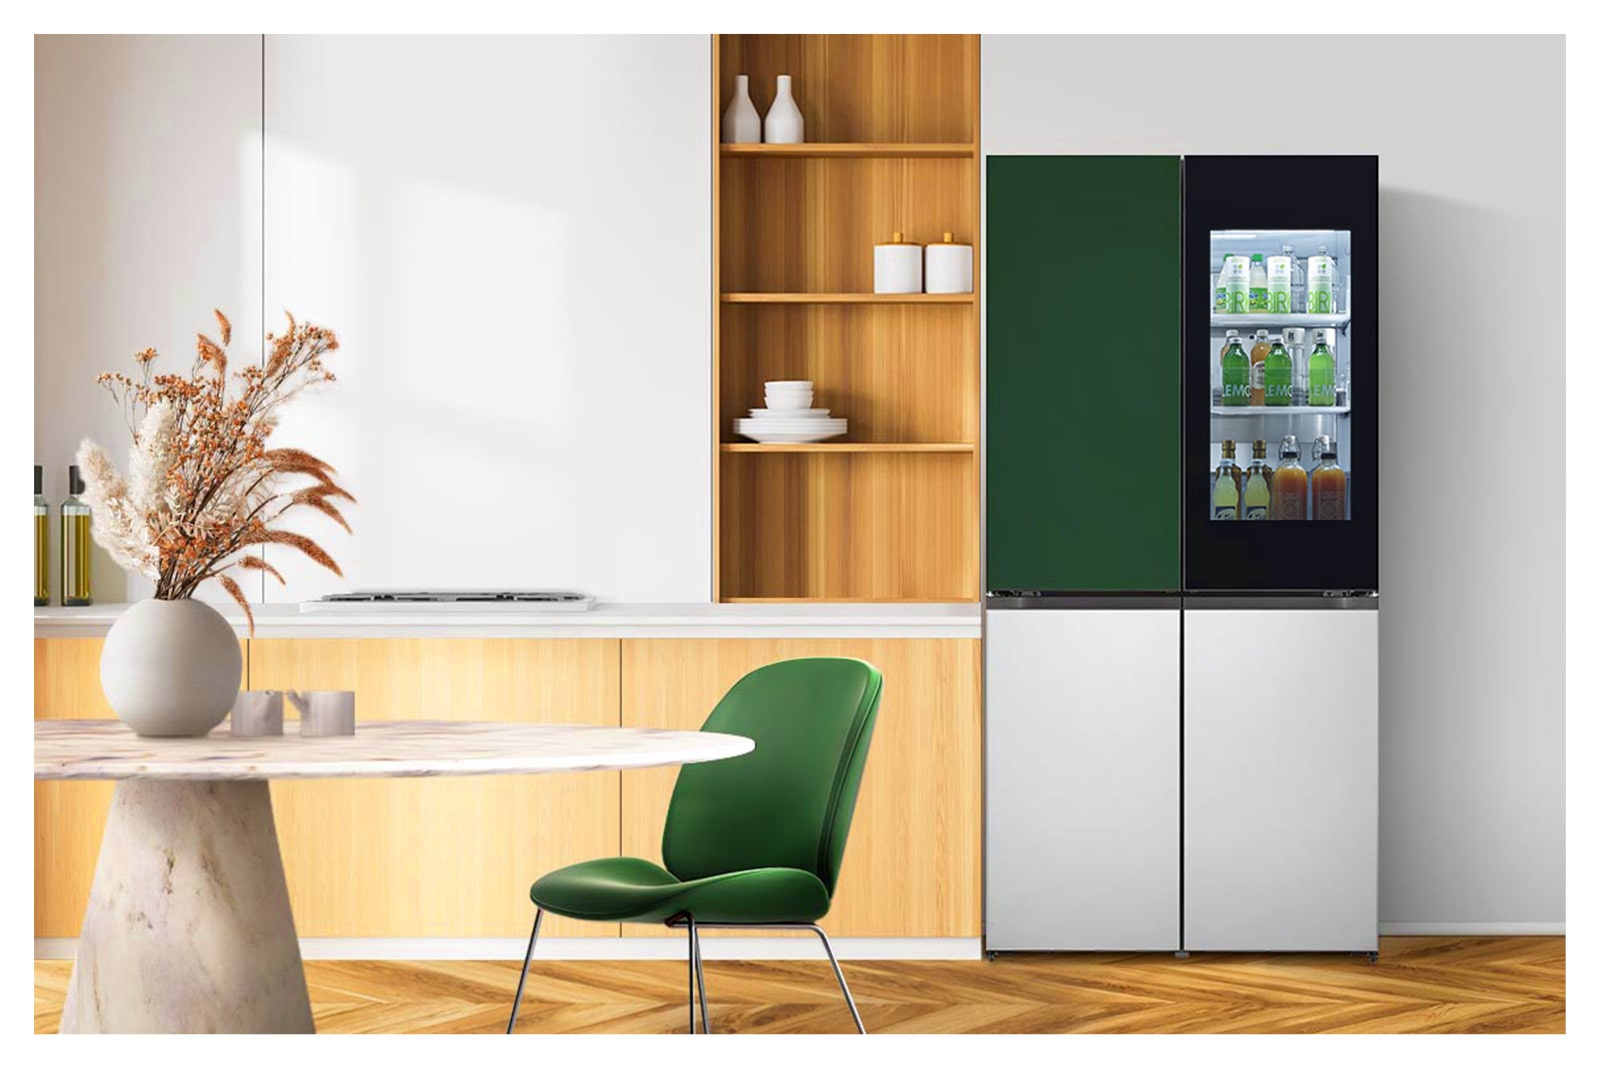 It shows solid green&silver color LG French Door Objet Collection is placed in a wood-tone modern kitchen.